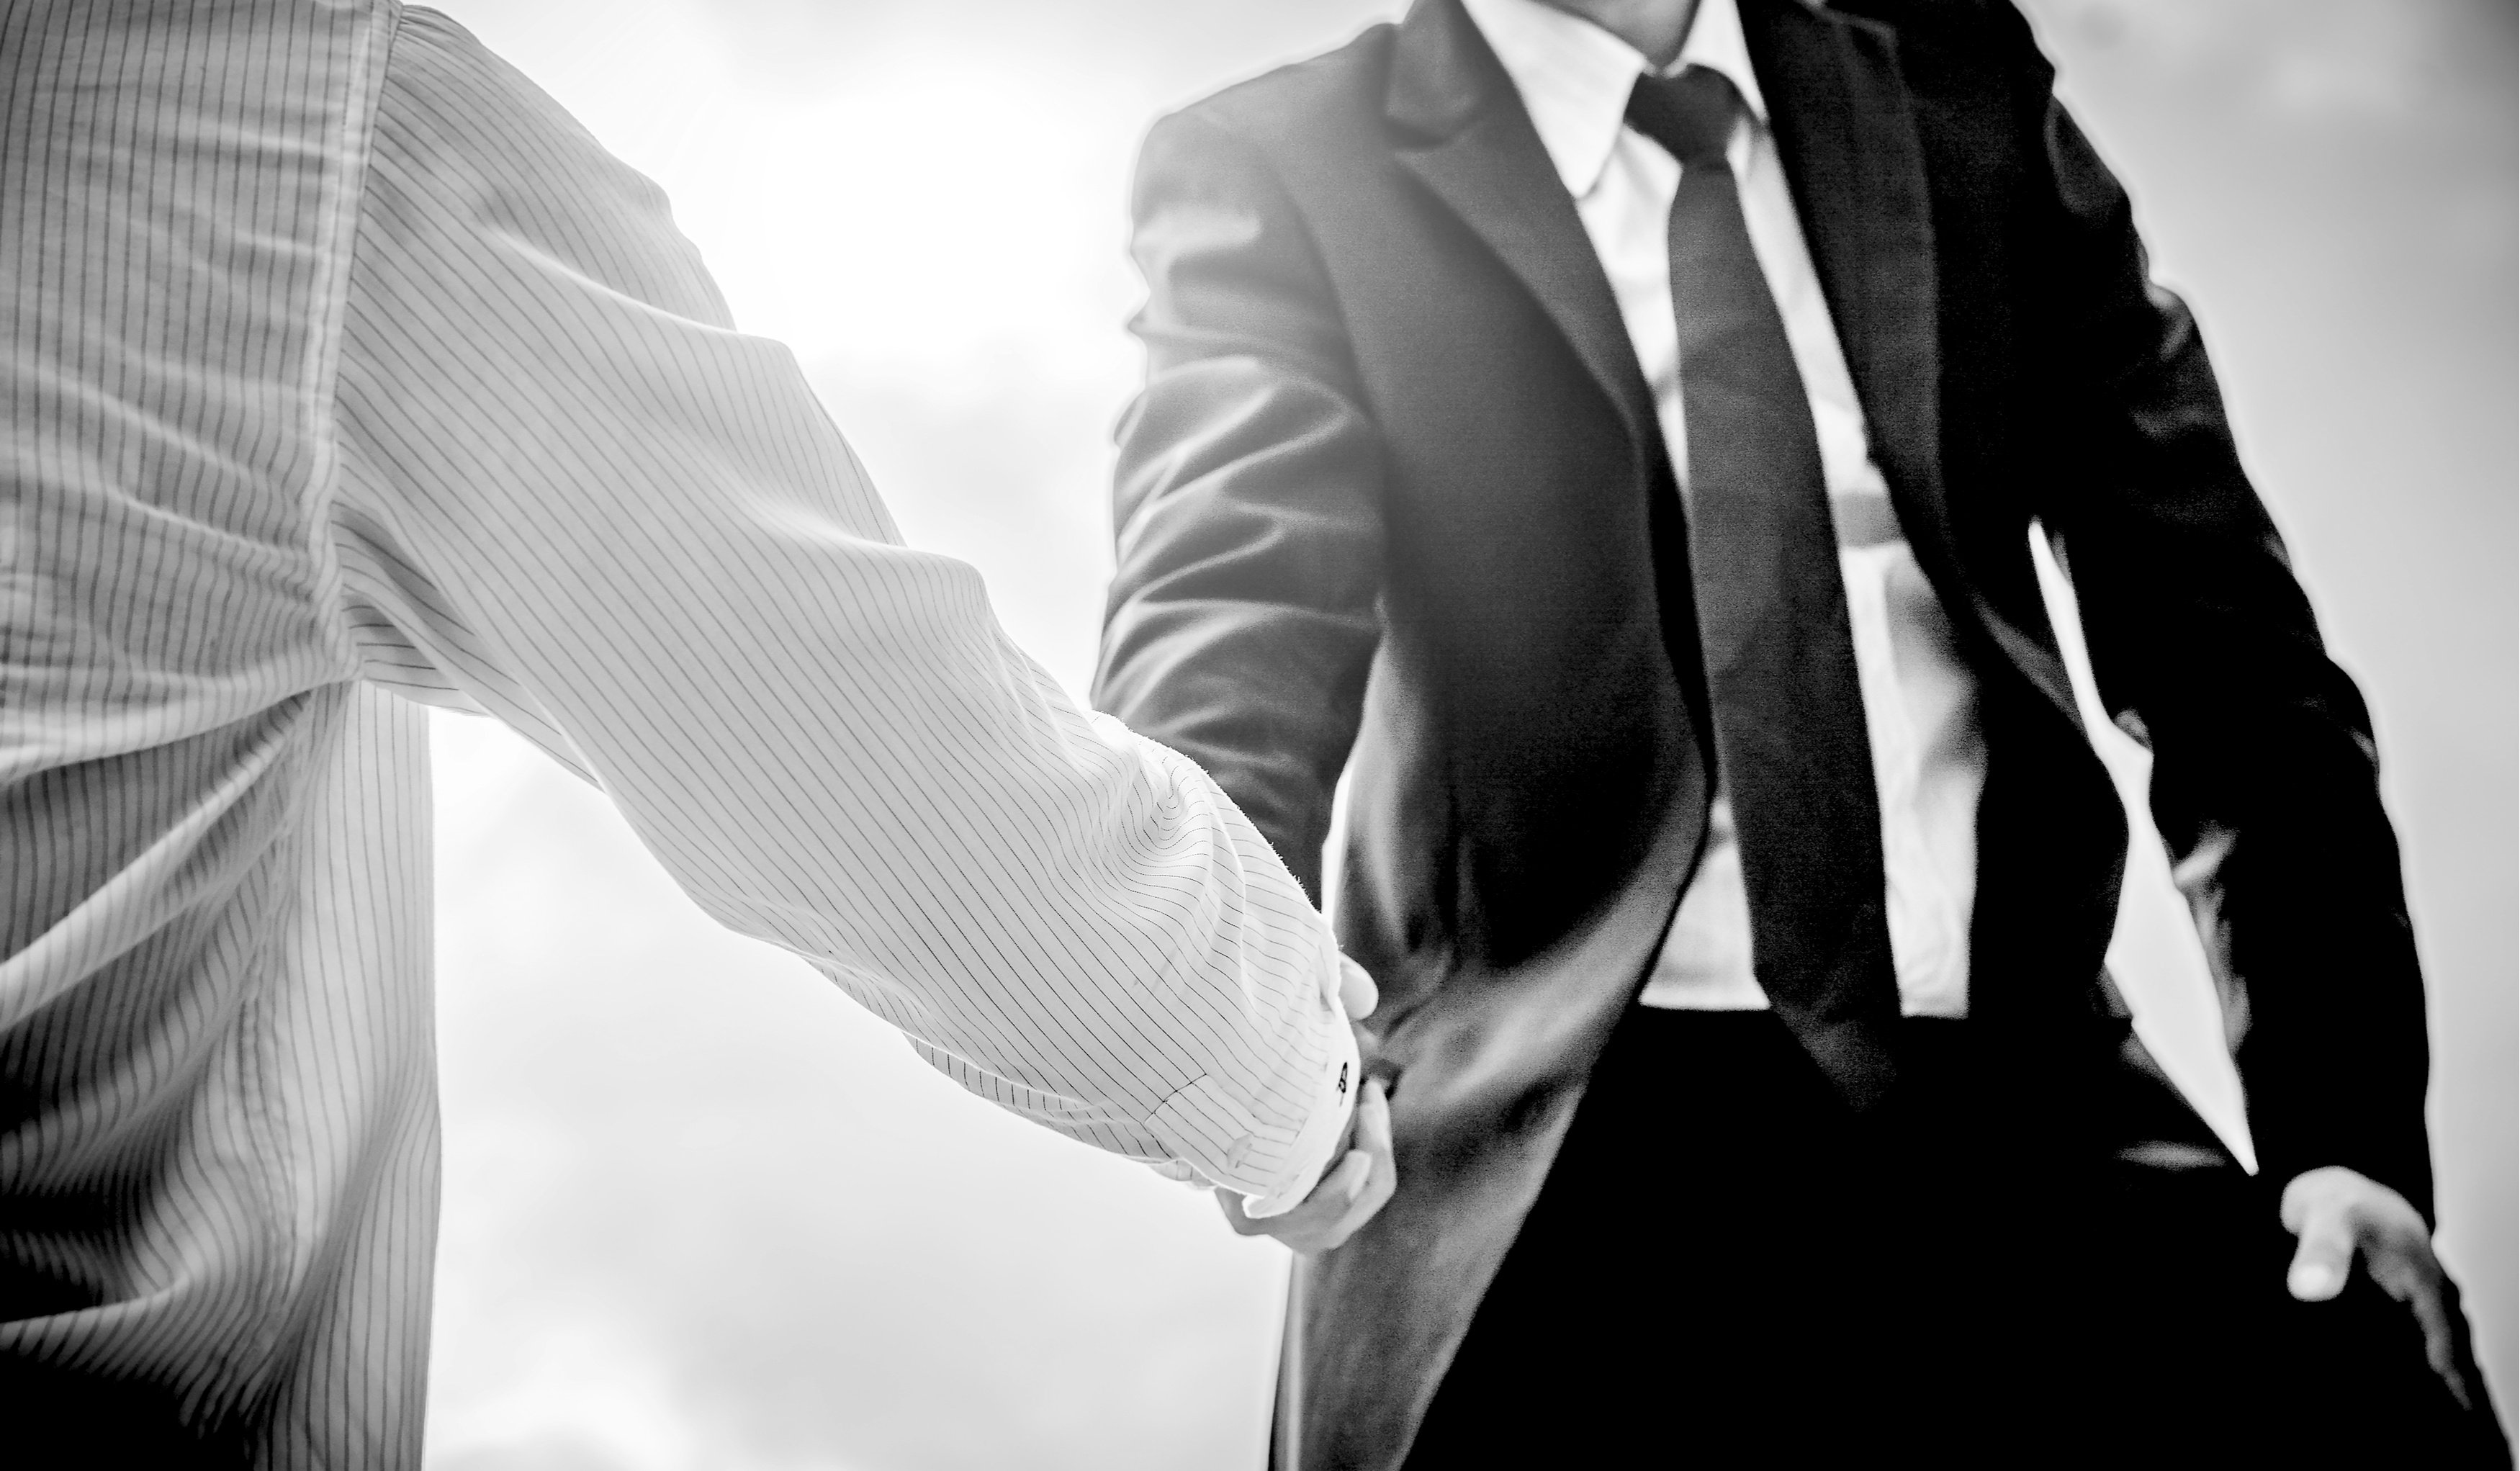 two marketers wearing suits shaking hands